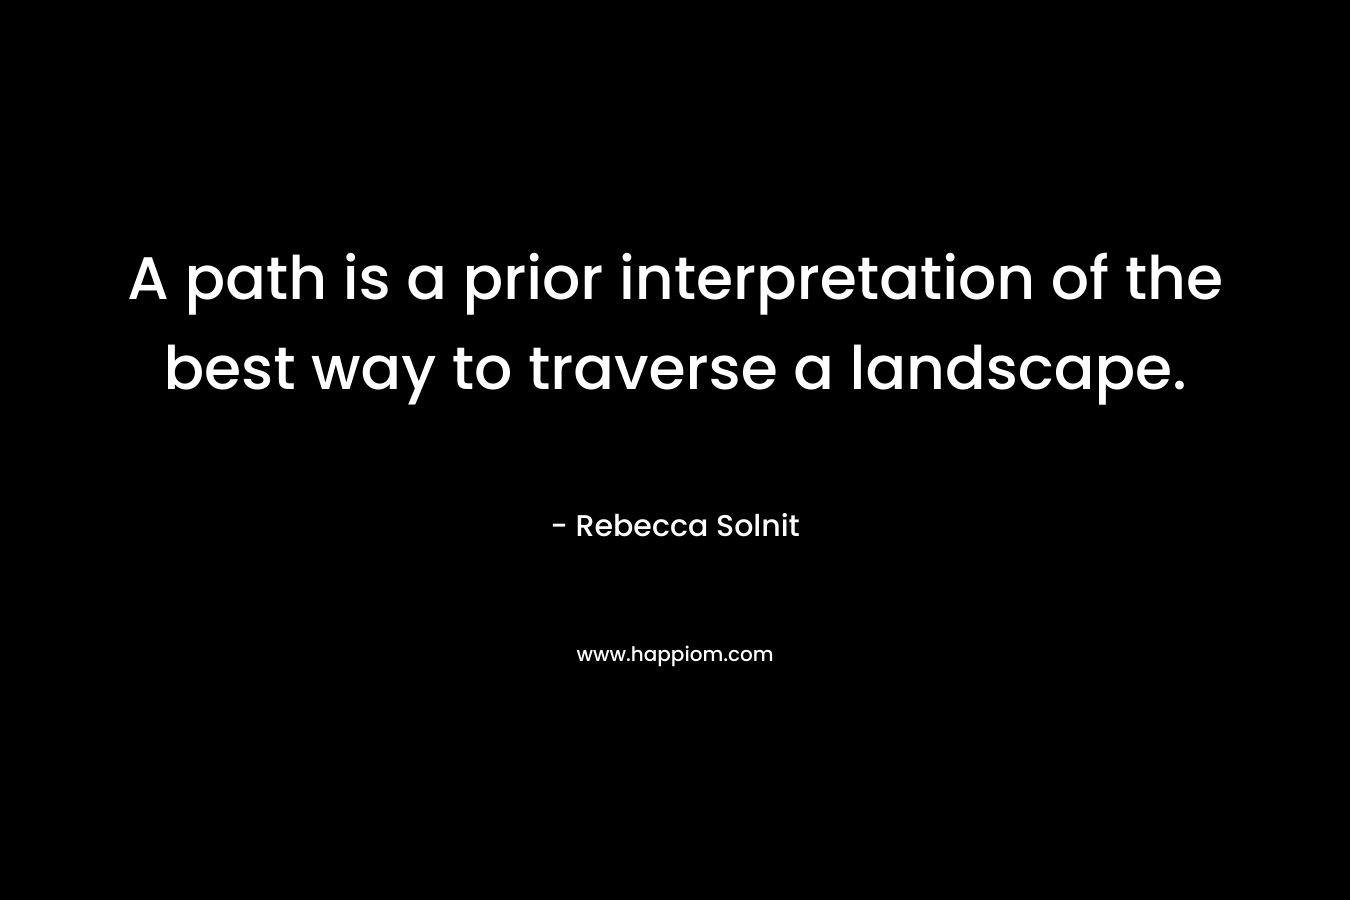 A path is a prior interpretation of the best way to traverse a landscape. – Rebecca Solnit